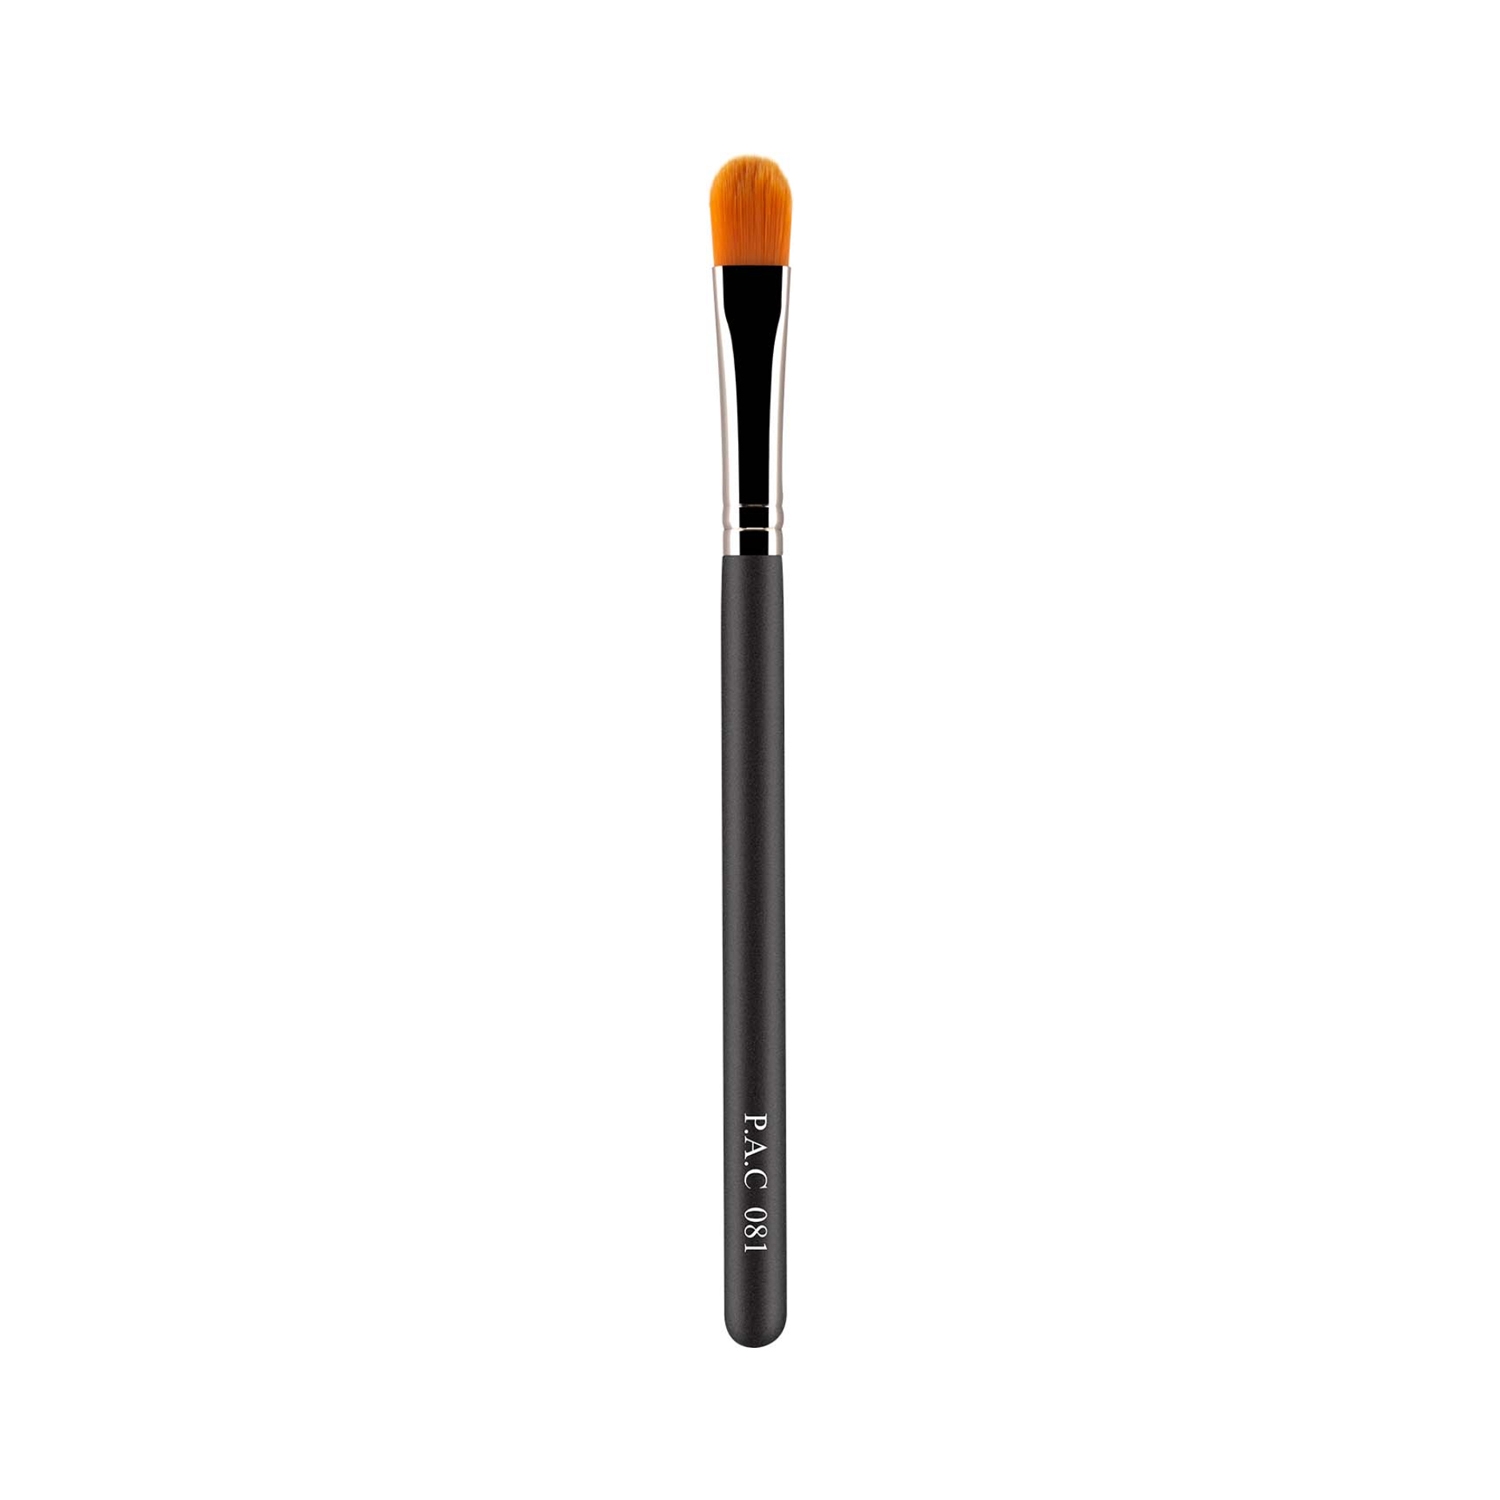 PAC | PAC Concealer Brush - 081 (1Pc)